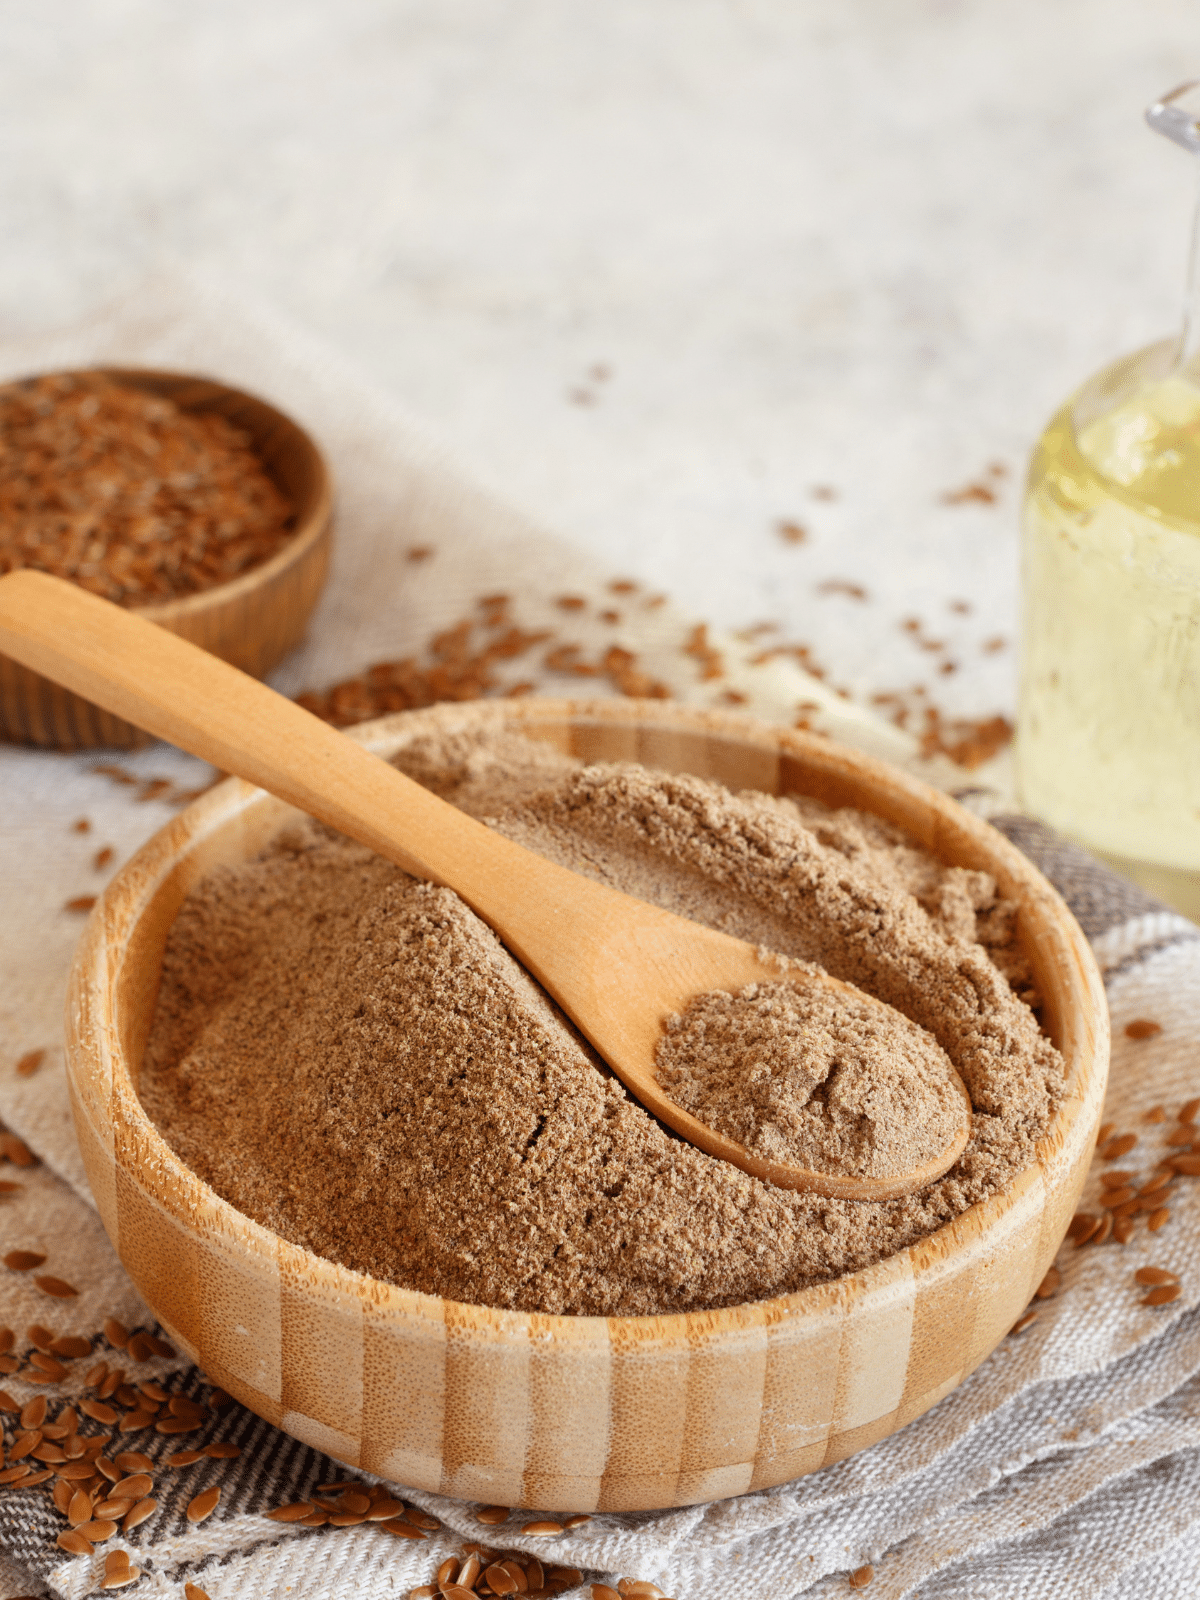 Flax meal flour in a wooden bowl.